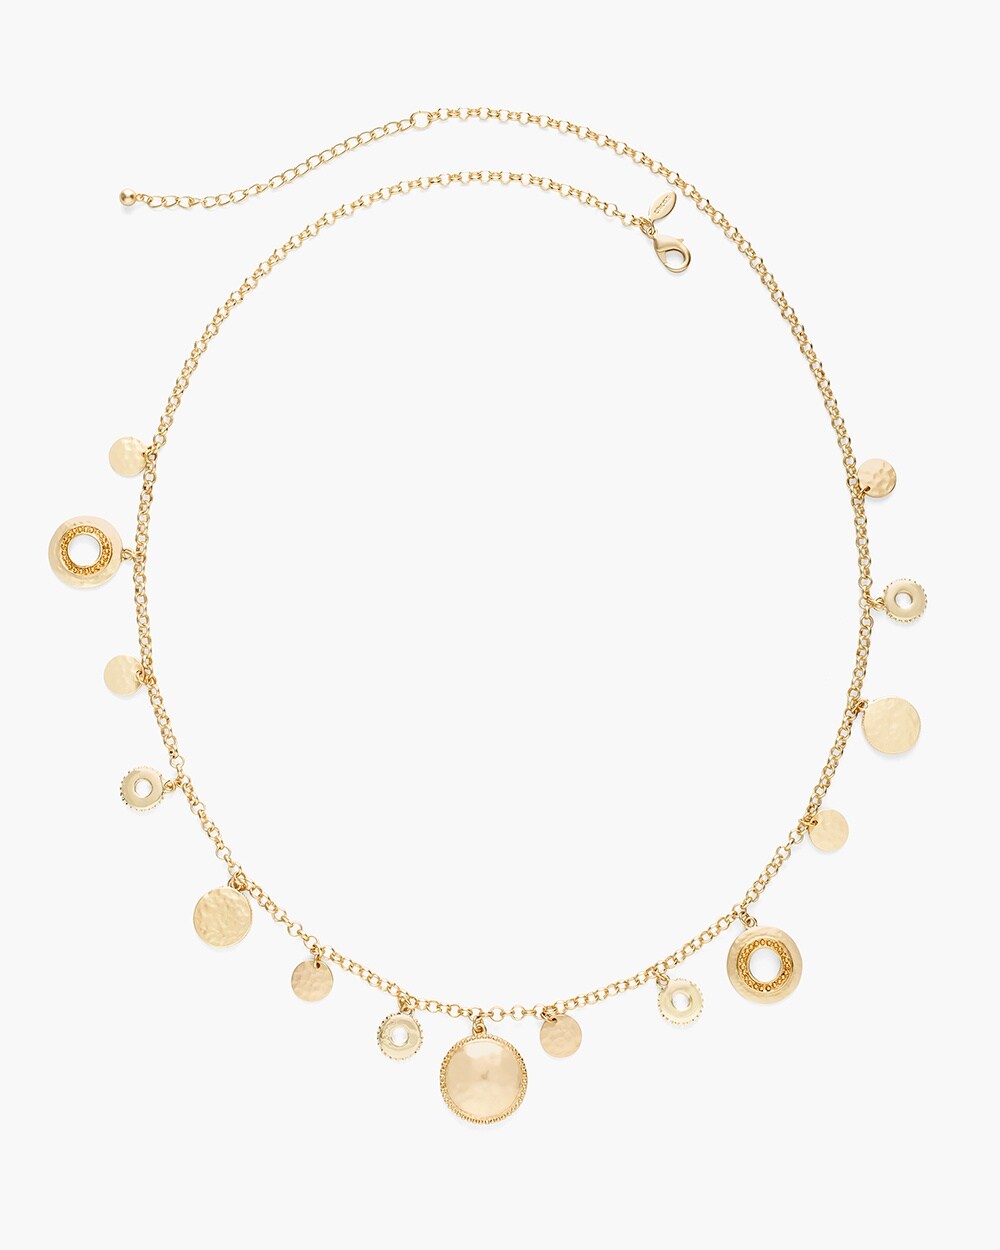 Long Gold-Tone Textured Single-Strand Necklace